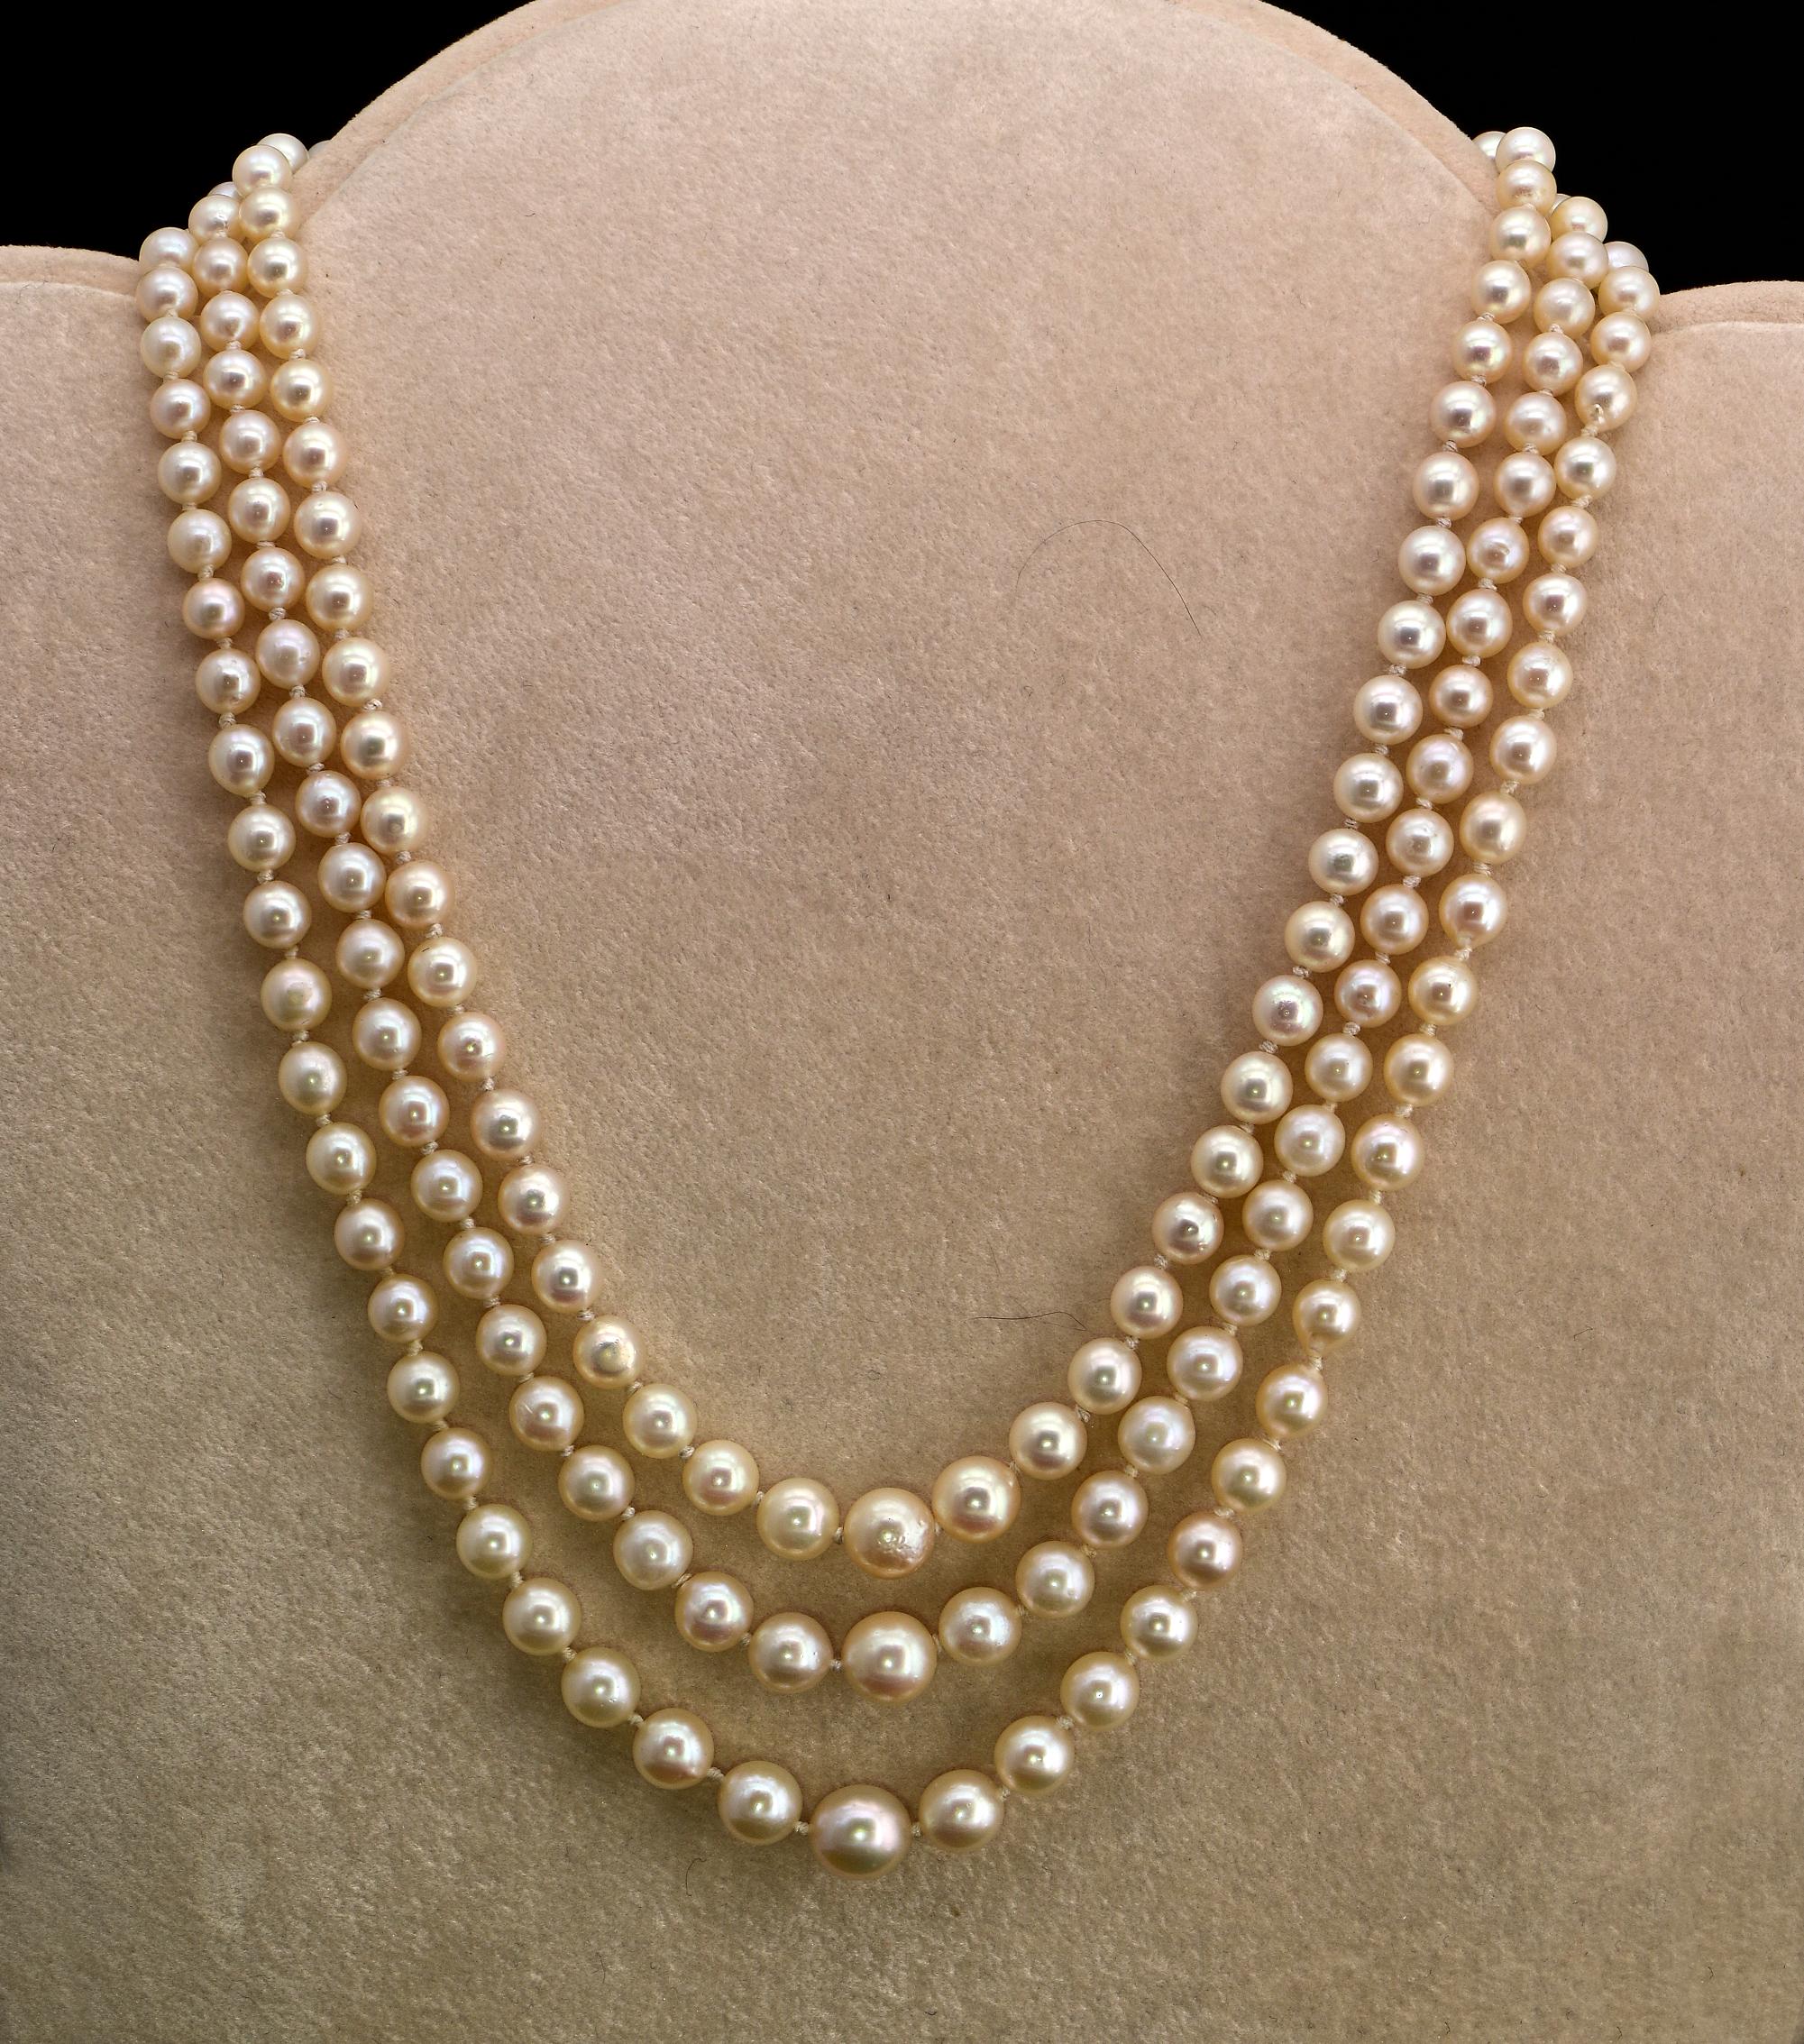 Pearls Allure
This timeless Art Deco Pearl necklace is 1925 ca
Hard to find triple strands, genuine antique, comes into three rows of antique cultured salt water Pearls graduate in size from 4.2 to 8.2 mm.
Gorgeous cream colour, well matched in